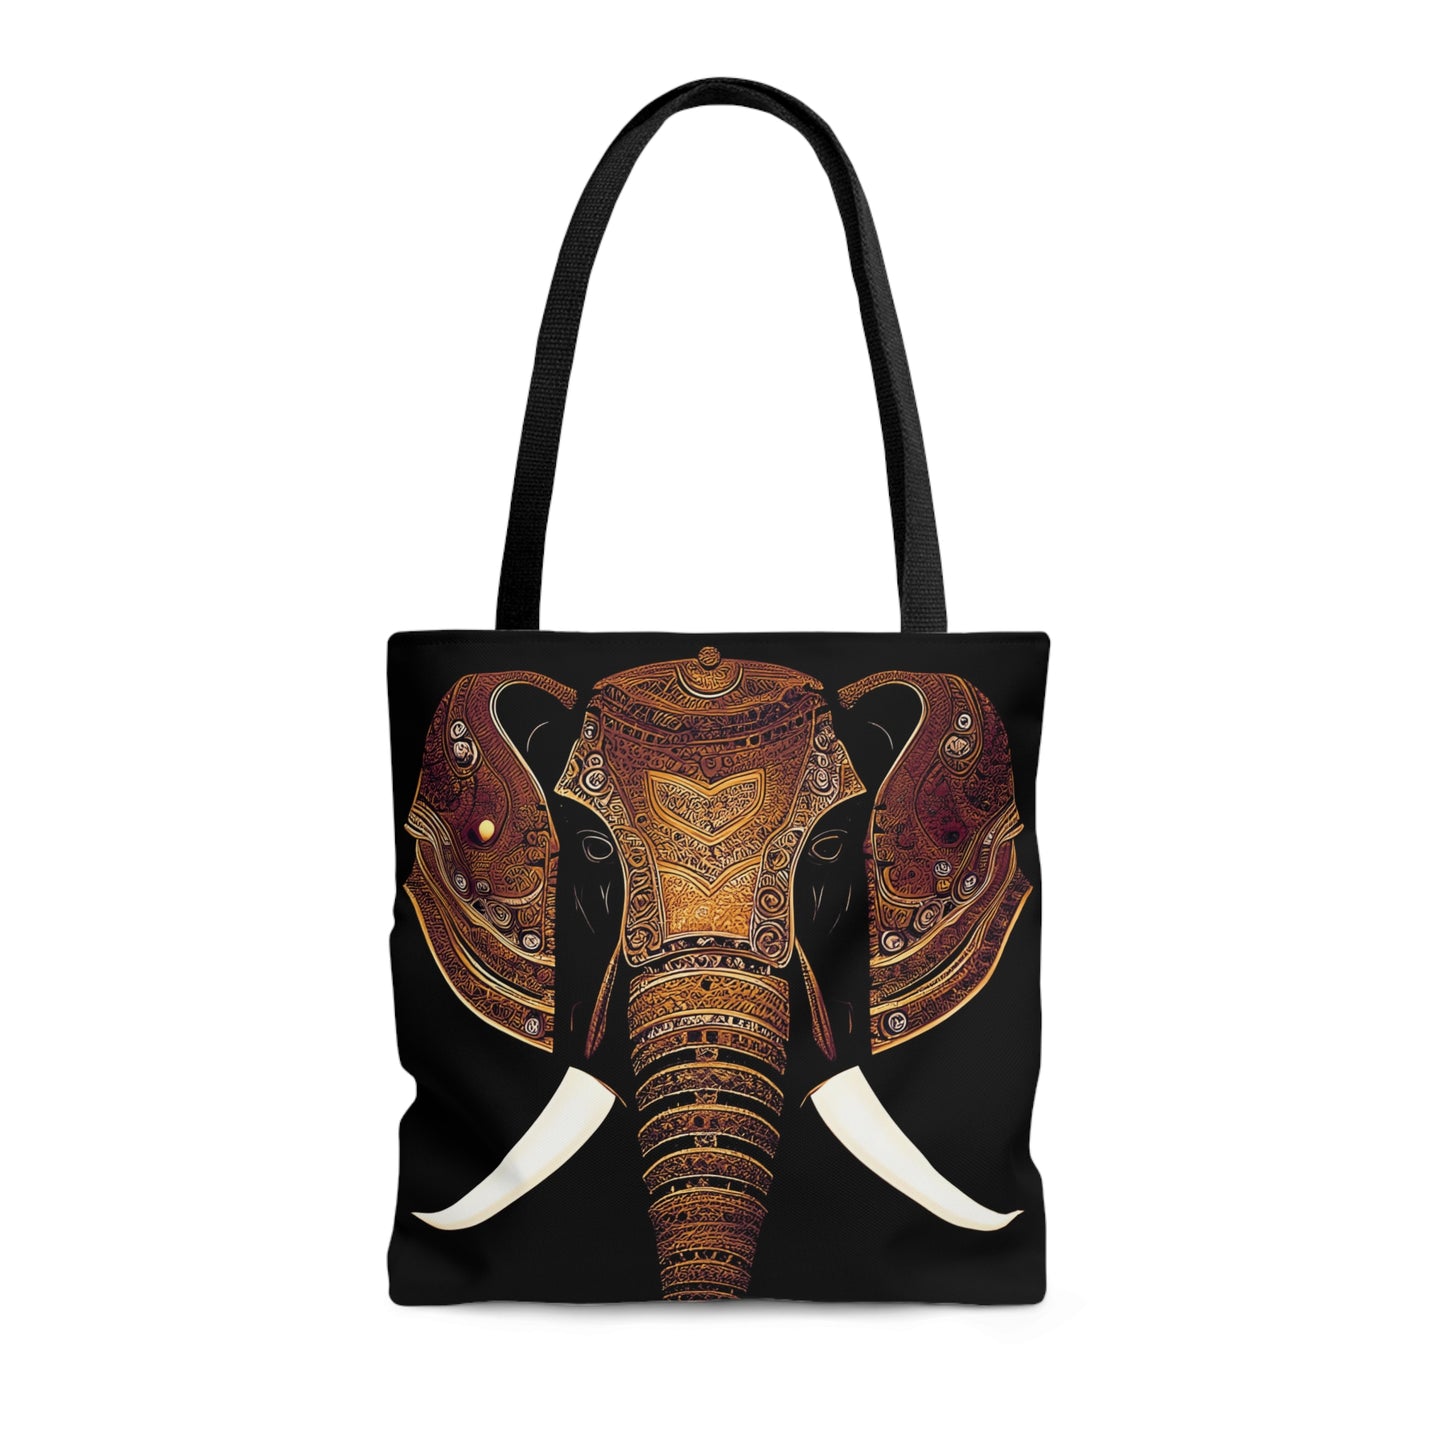 Indian Elephant Head With Parade Colors on Black Background tote bag